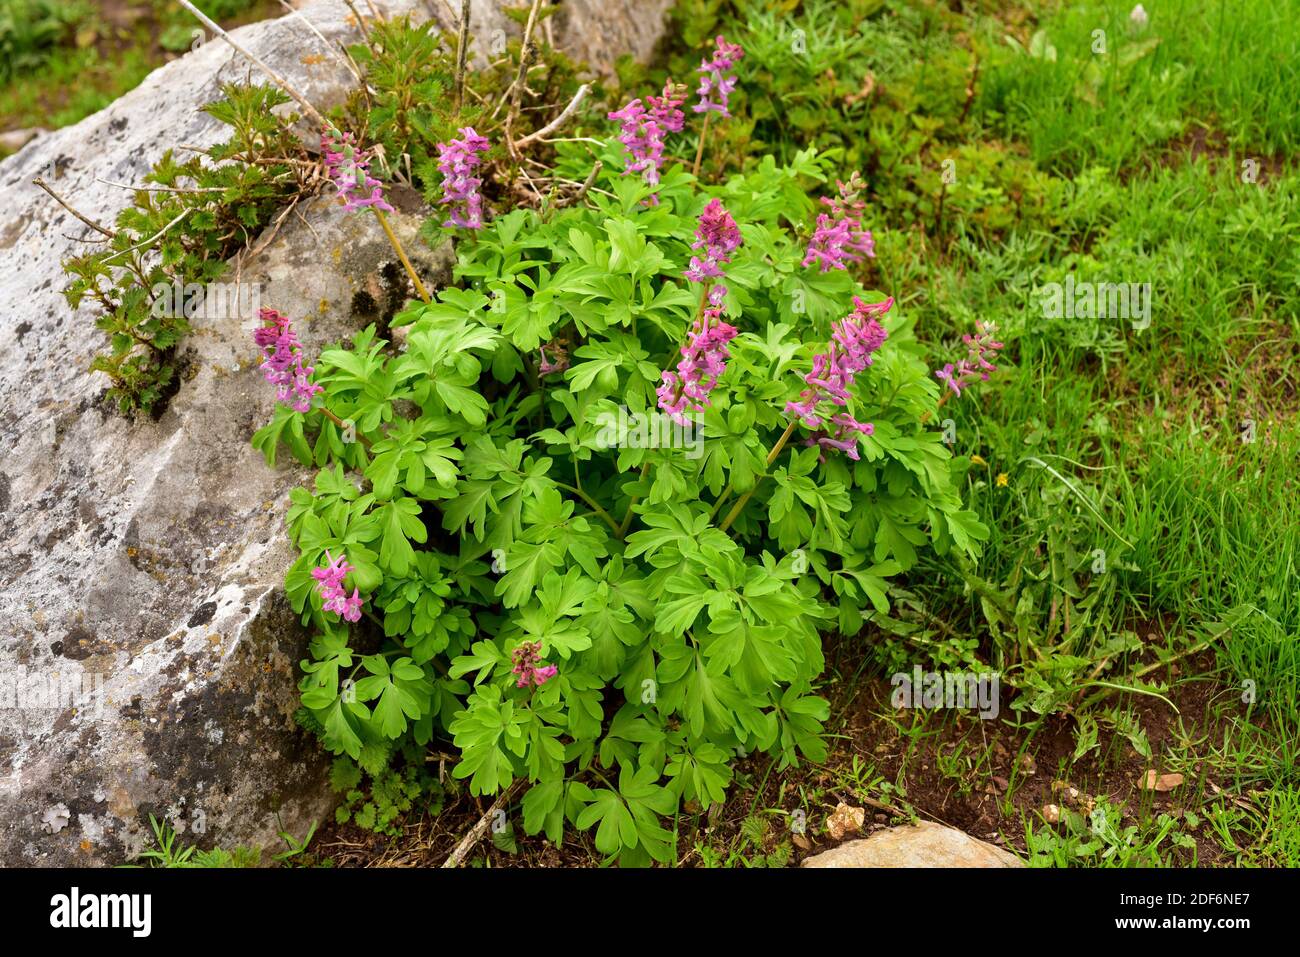 Hollowroot (Corydalis bulbosa or Corydalis cava) is a perennial herb native to Europe. This photo was taken in Babia, Leon province, Castilla-Leon, Stock Photo